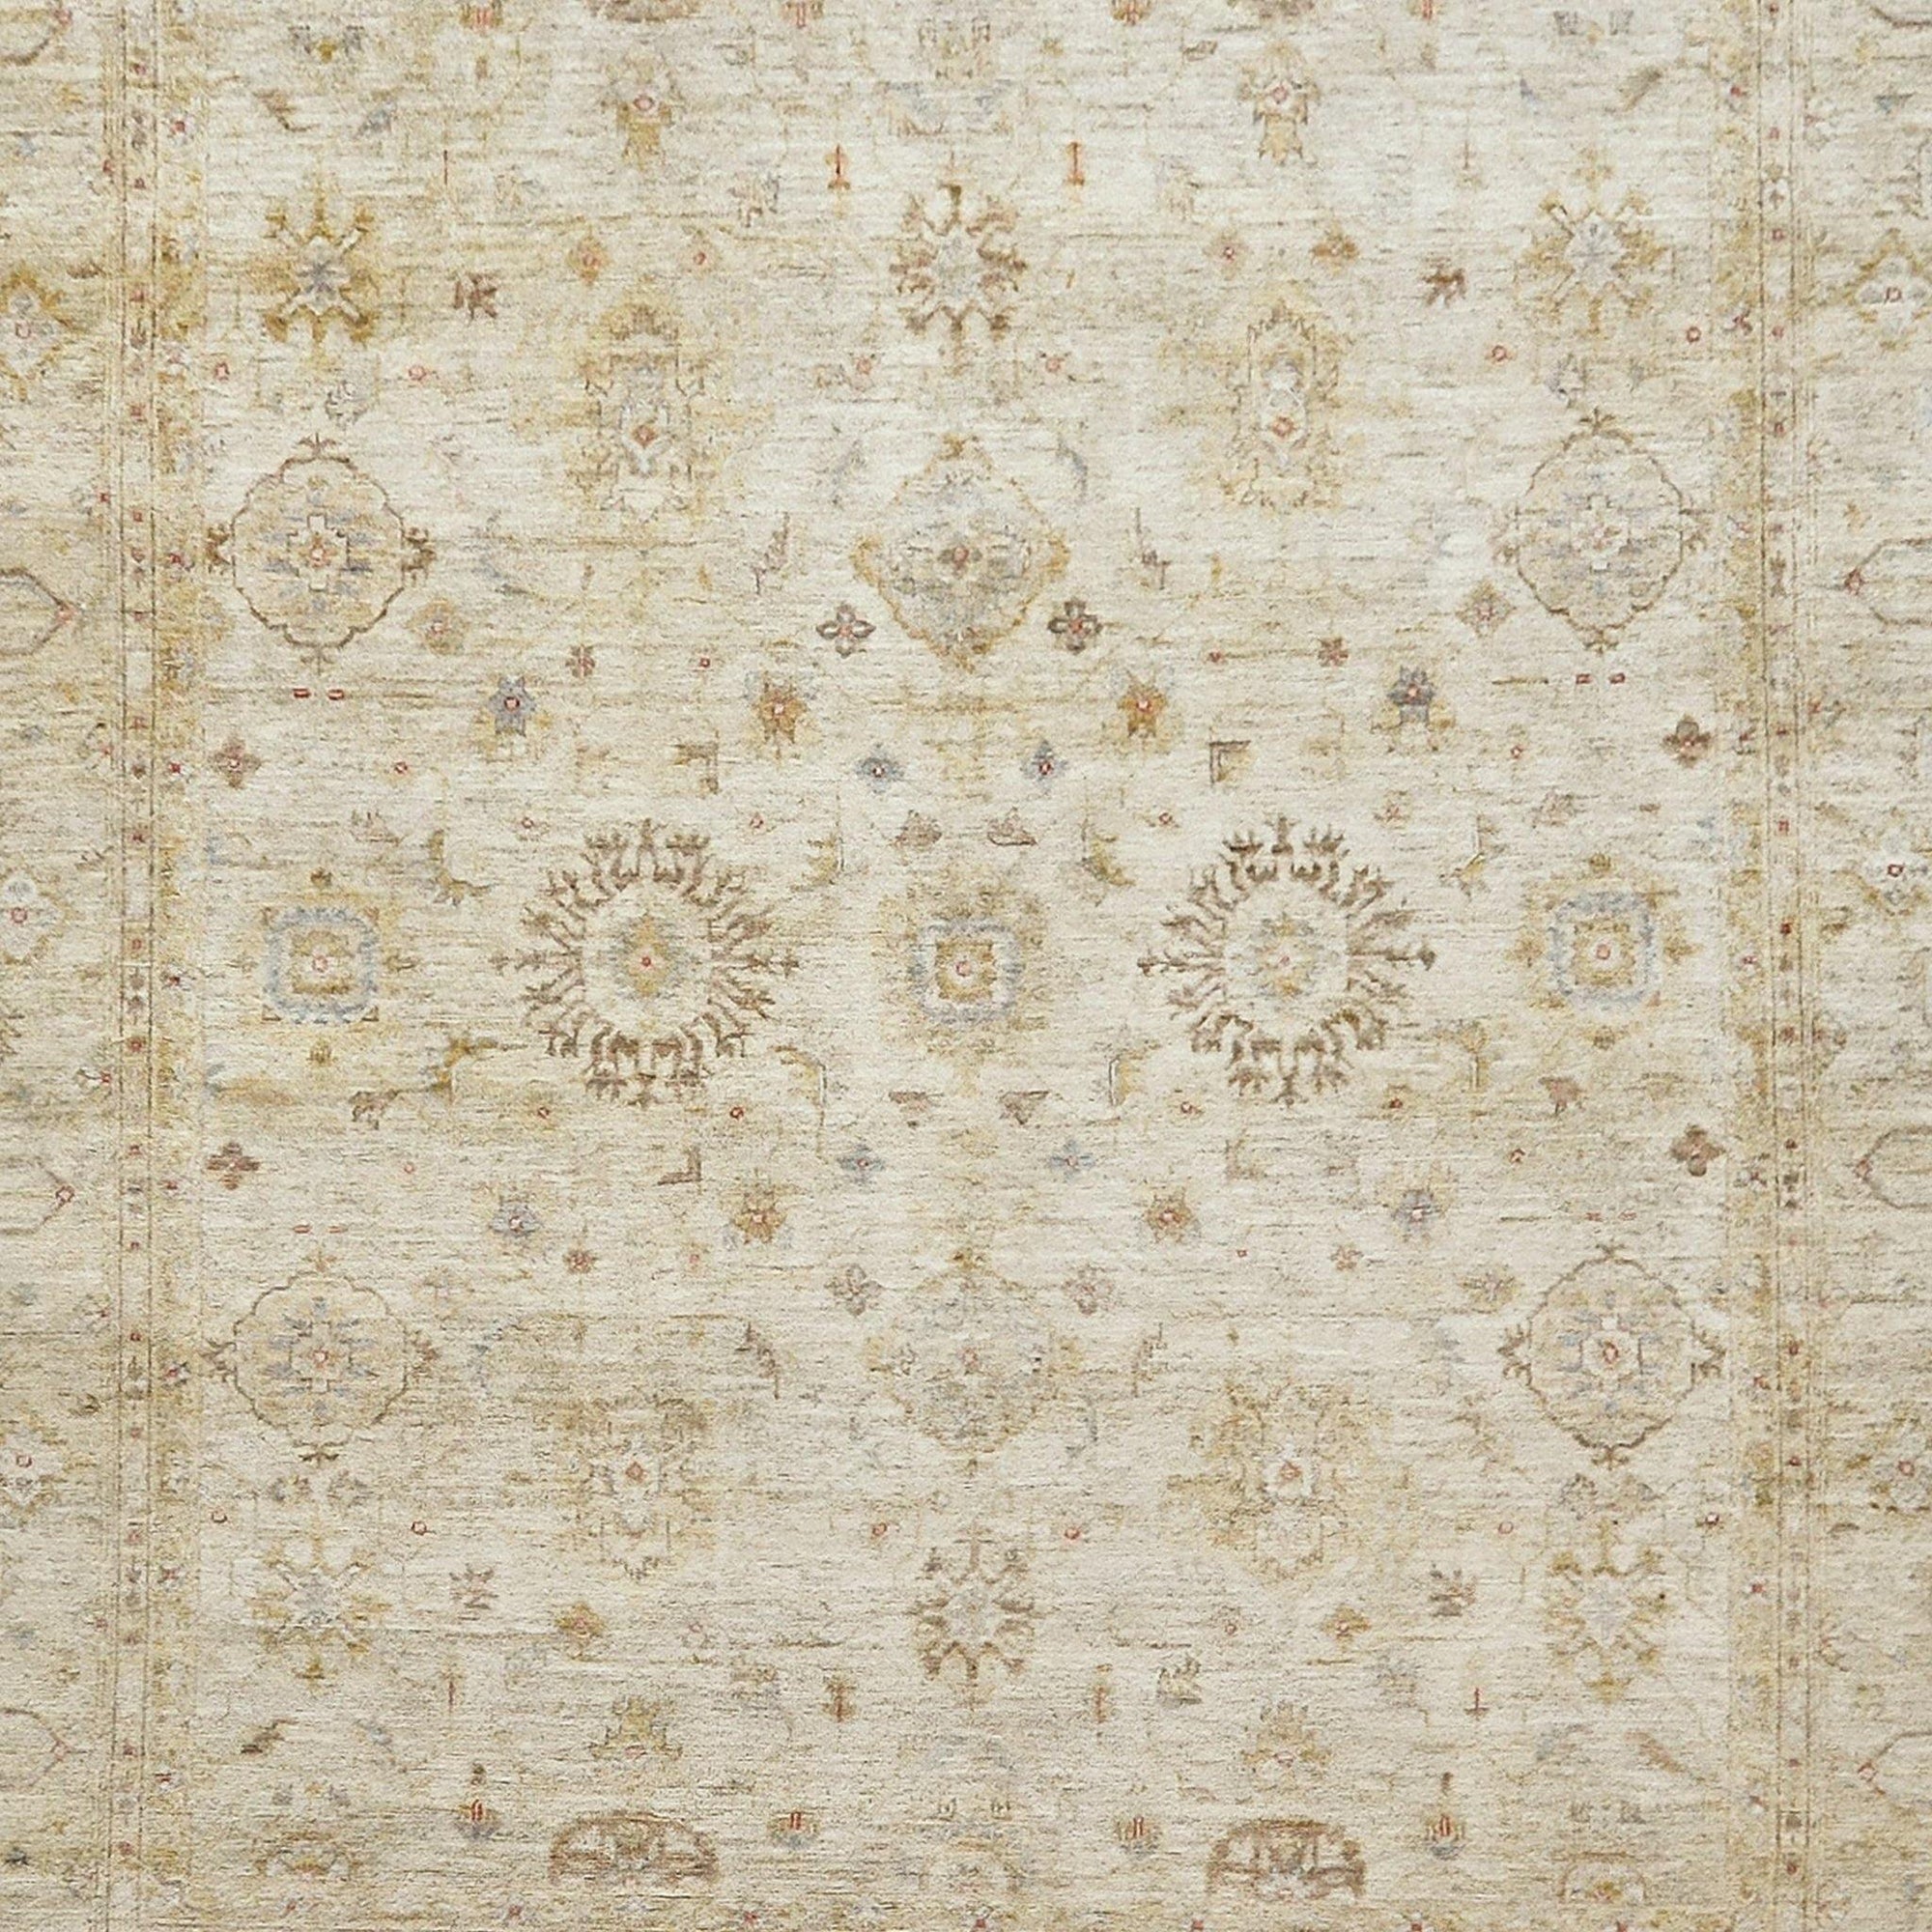 Contemporary Hand-knotted Colour Reform Wool Rug 244cm x 280cm